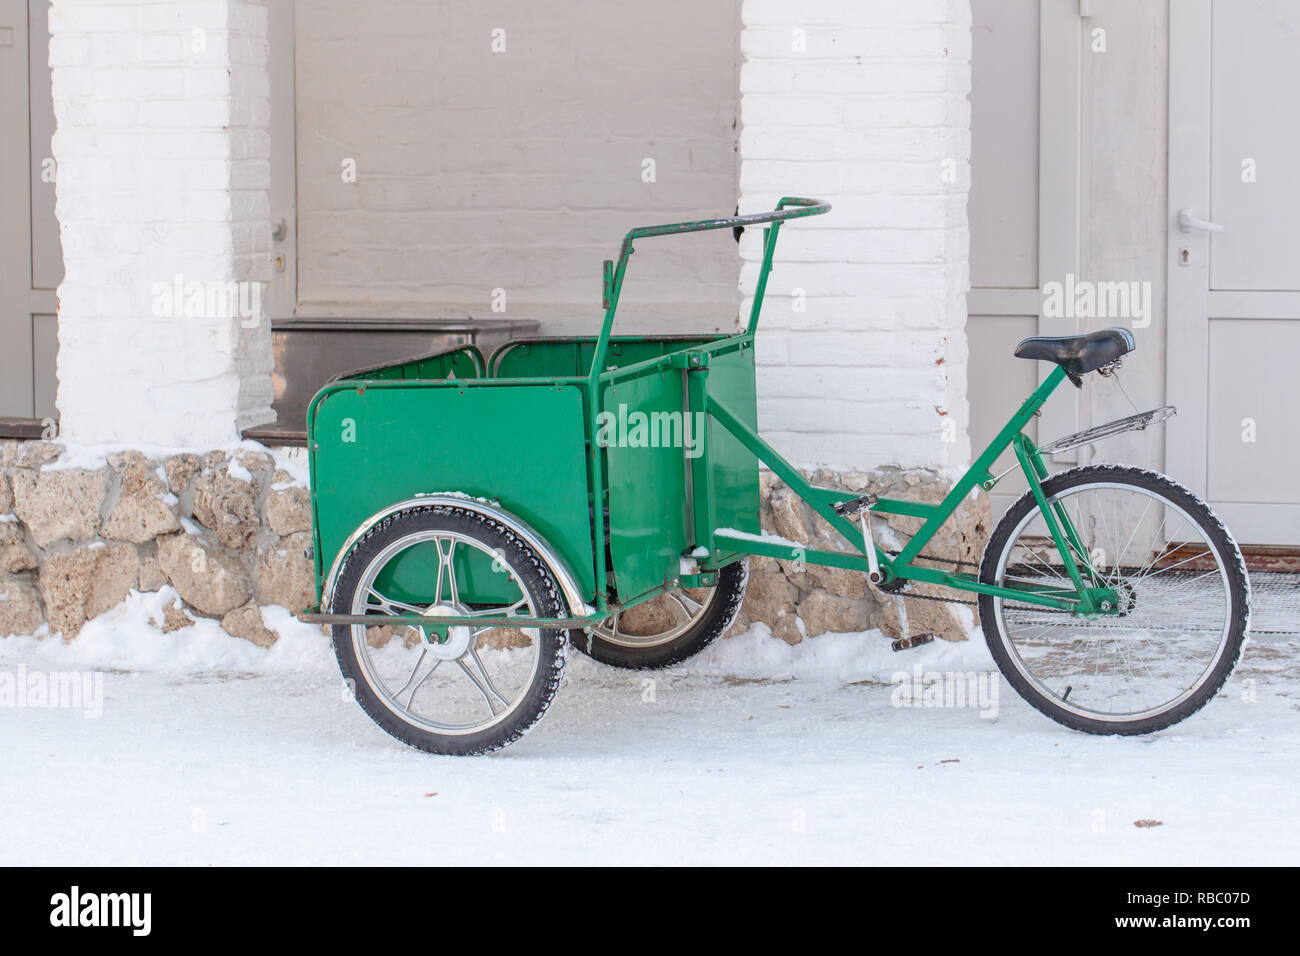 Amsterdam The Netherlands Winter Green Trolley On A Bicycle Stands On White Snow Stock Photo Alamy